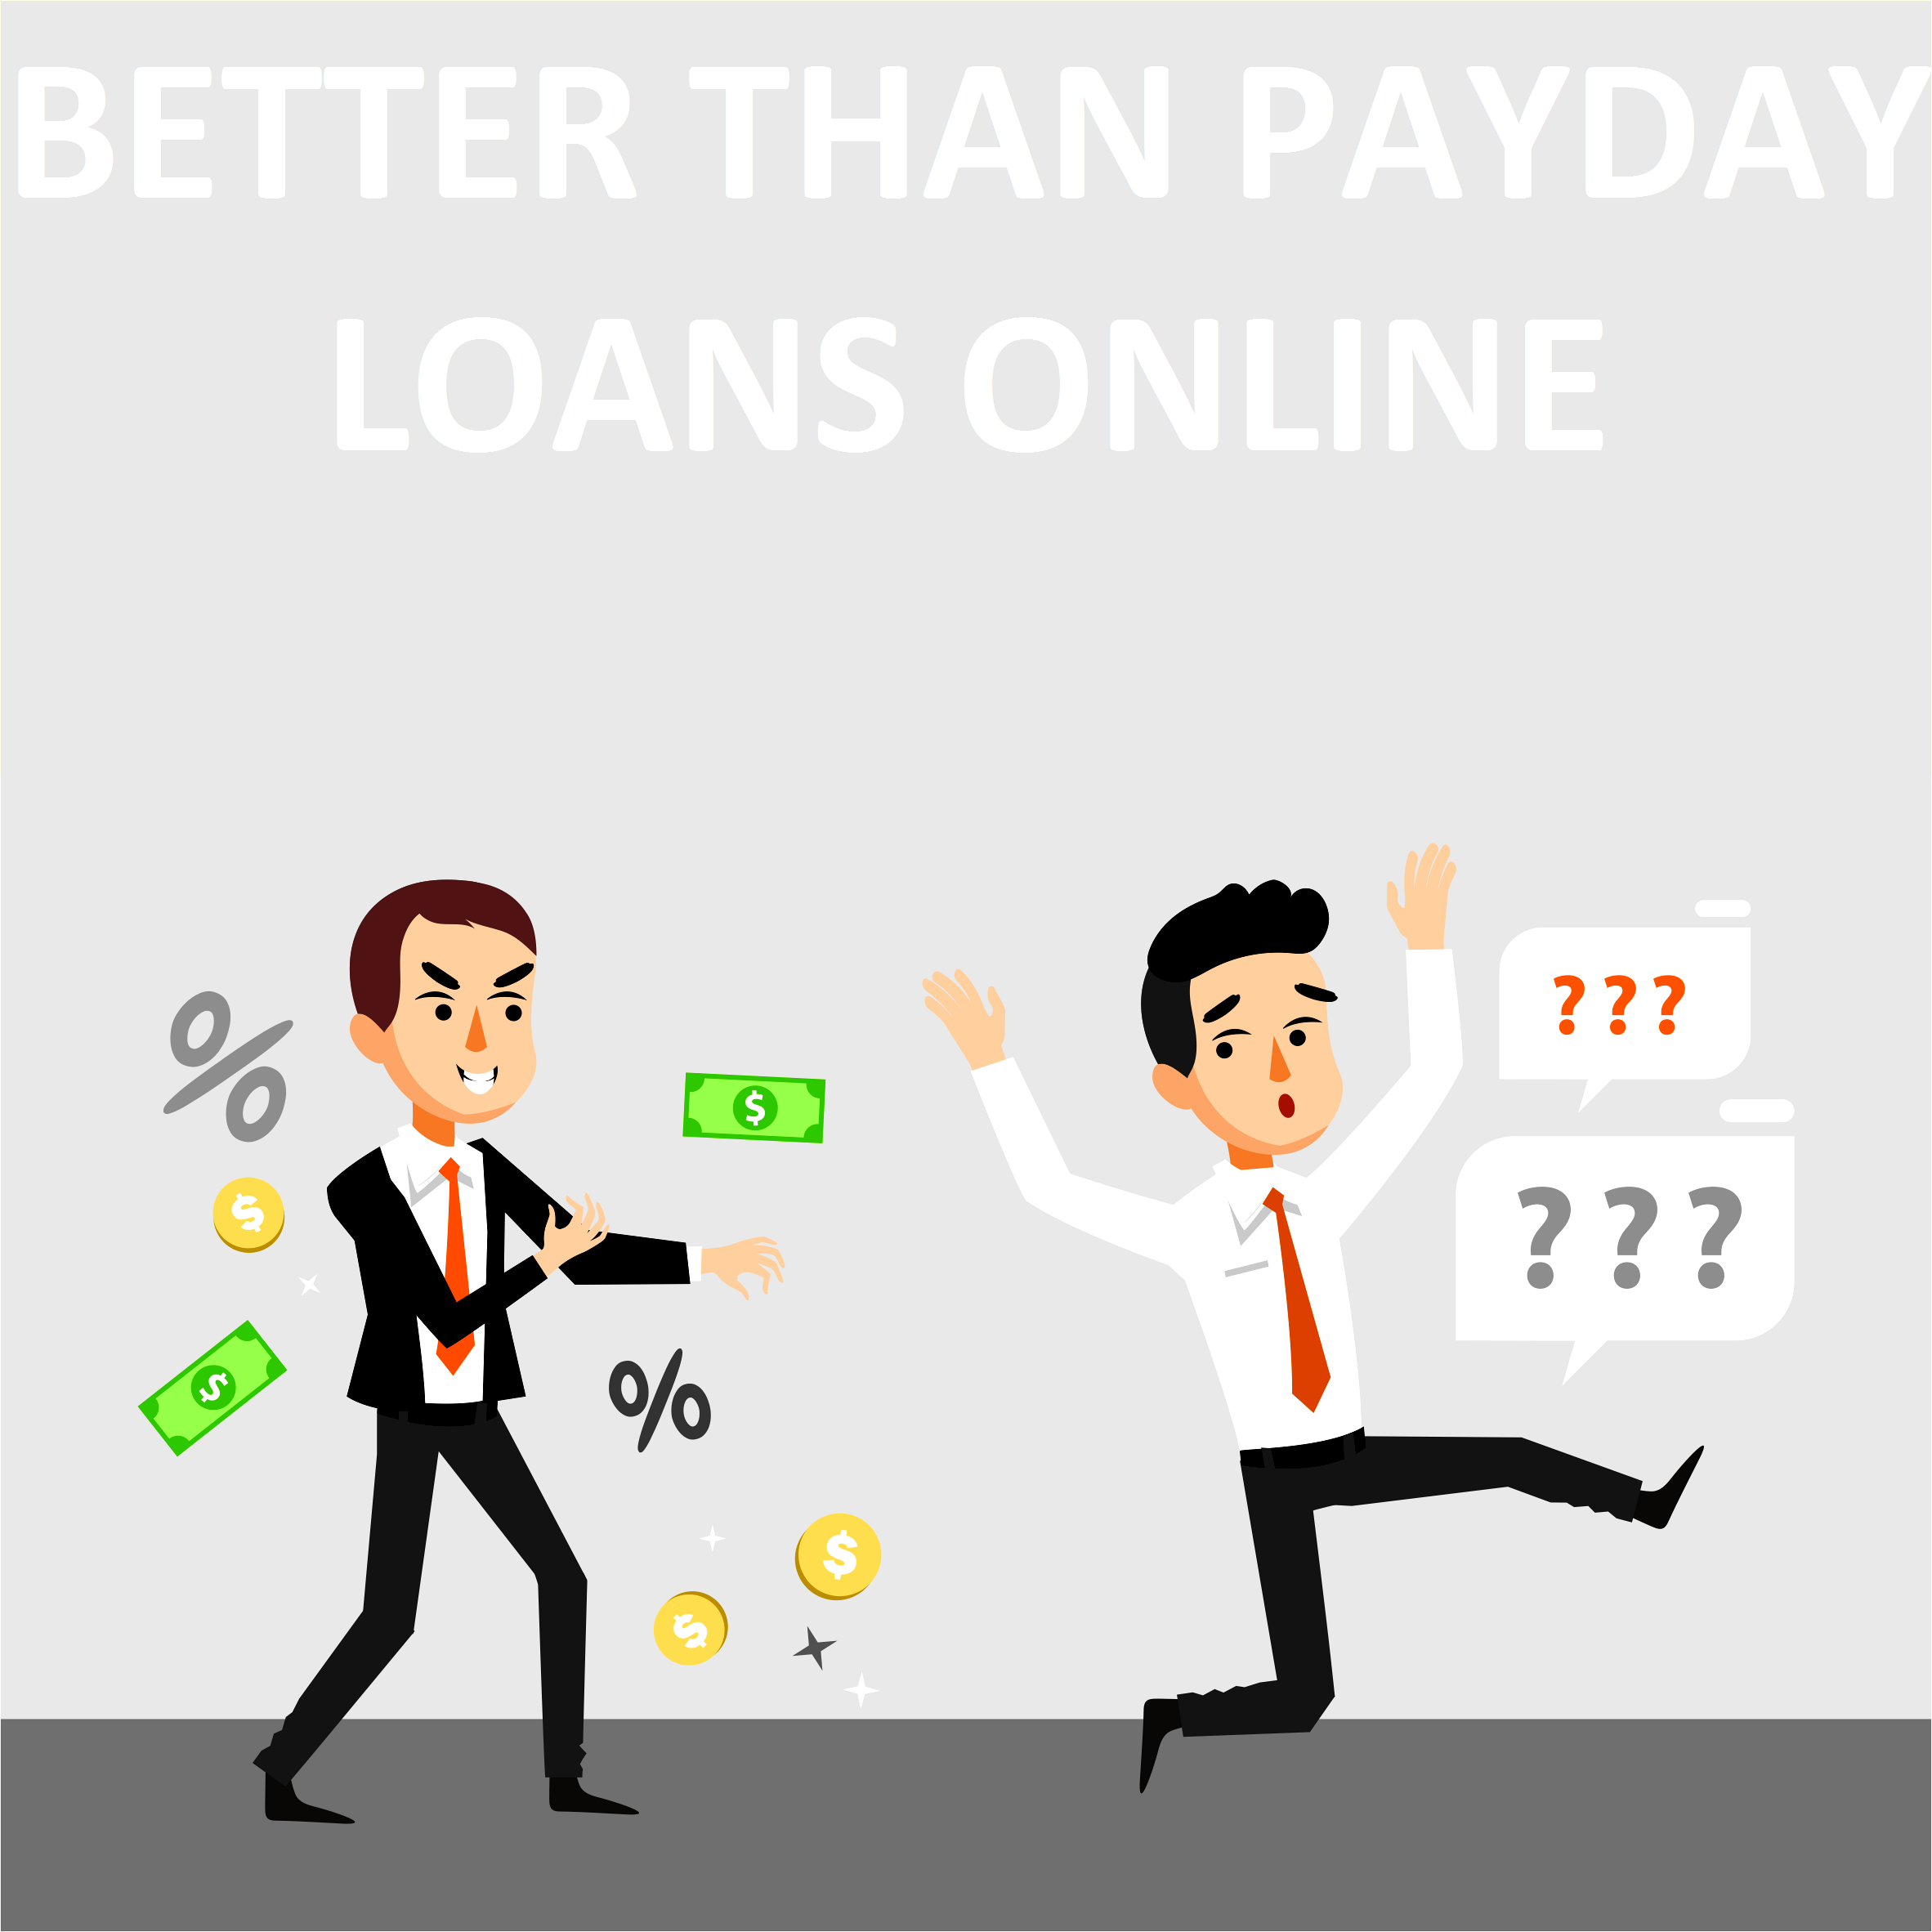 Better Than Payday Loans Online